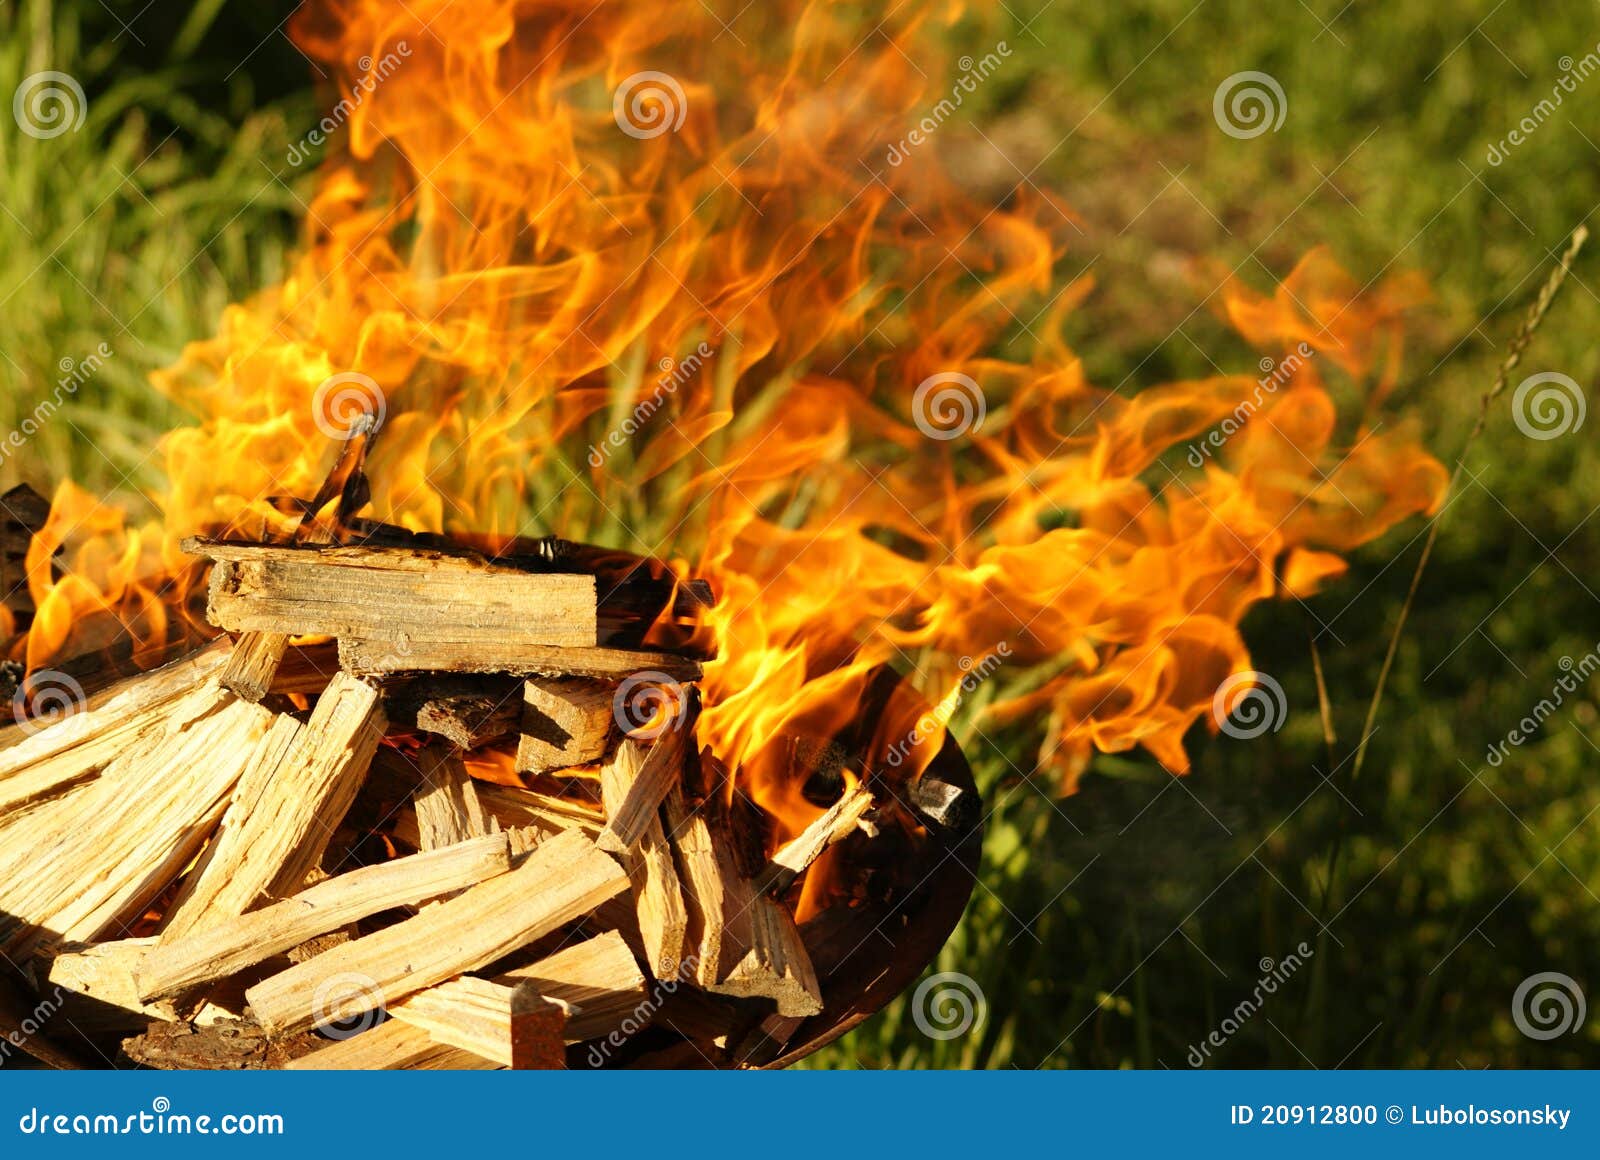 Barbecue fire stock photo. Image of barbecue, flame, grilling - 20912800